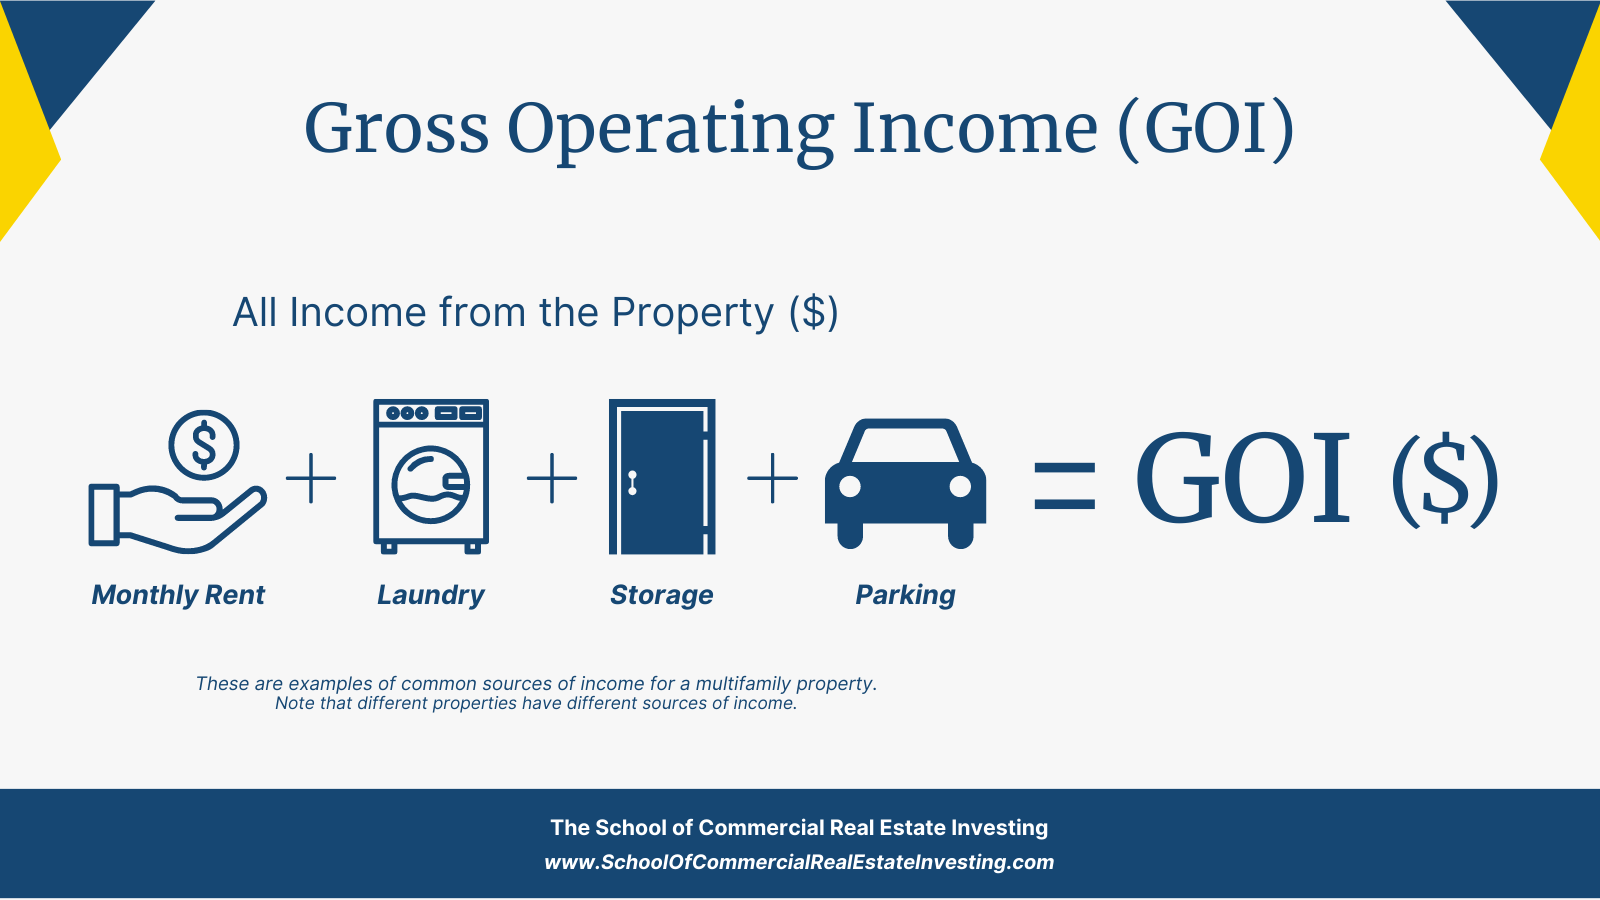 Calculate Gross Operating Income (GOI) by adding all revenue that a property generates.